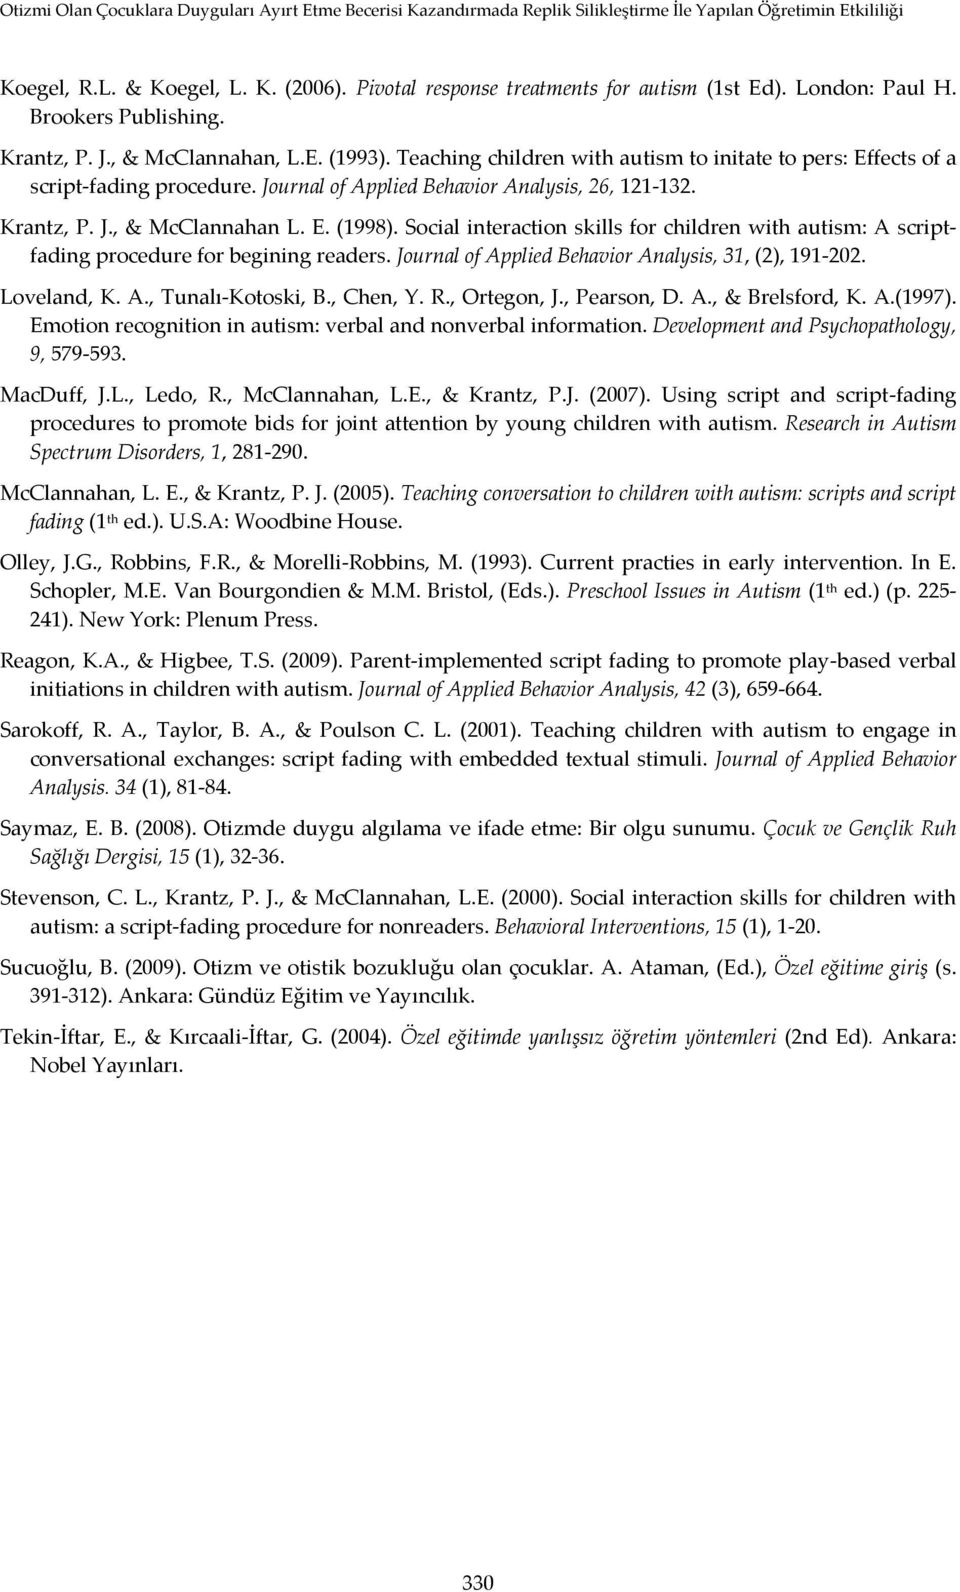 Social interaction skills for children with autism: A scriptfading procedure for begining readers. Journal of Applied Behavior Analysis, 31, (2), 191-202. Loveland, K. A., Tunalı-Kotoski, B., Chen, Y.